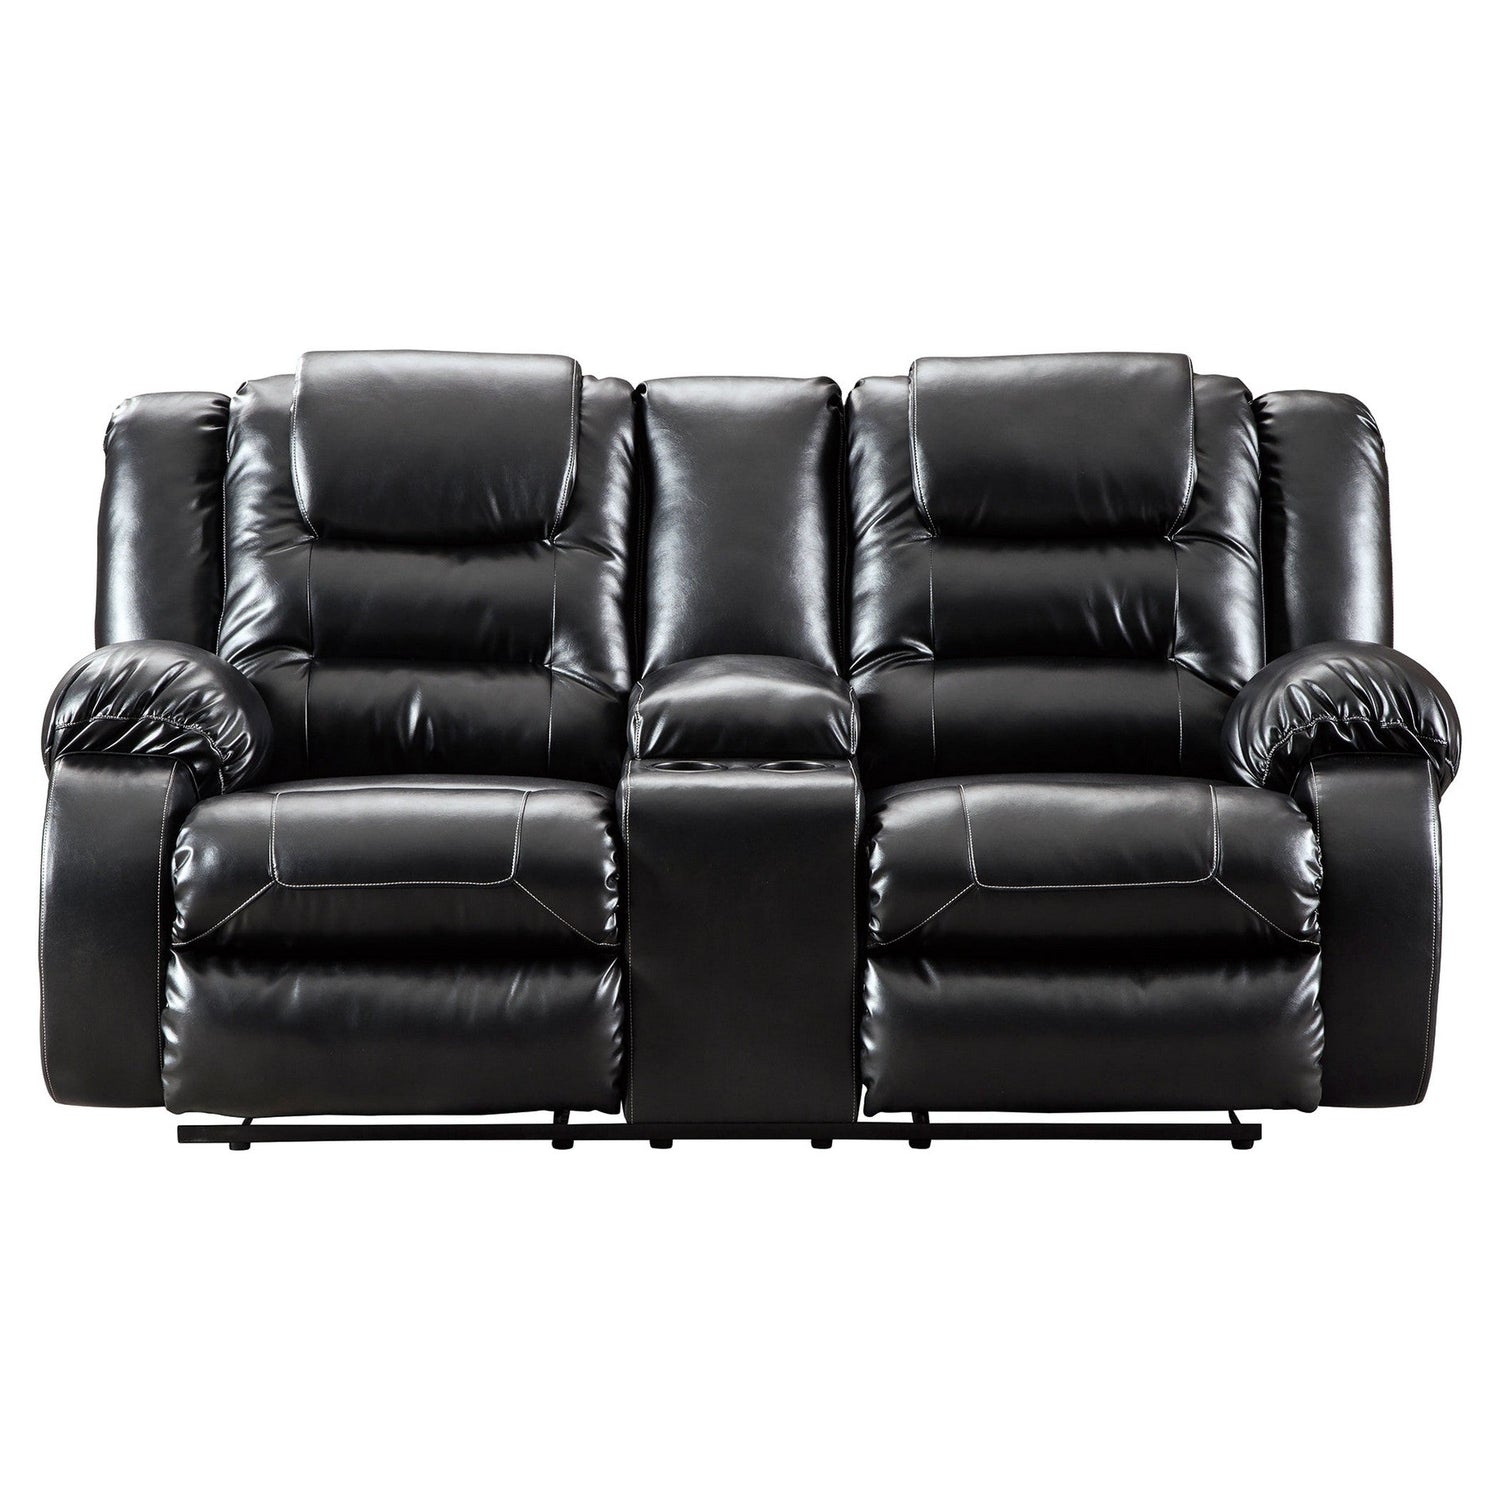 Vacherie Reclining Loveseat with Console Ash-7930894